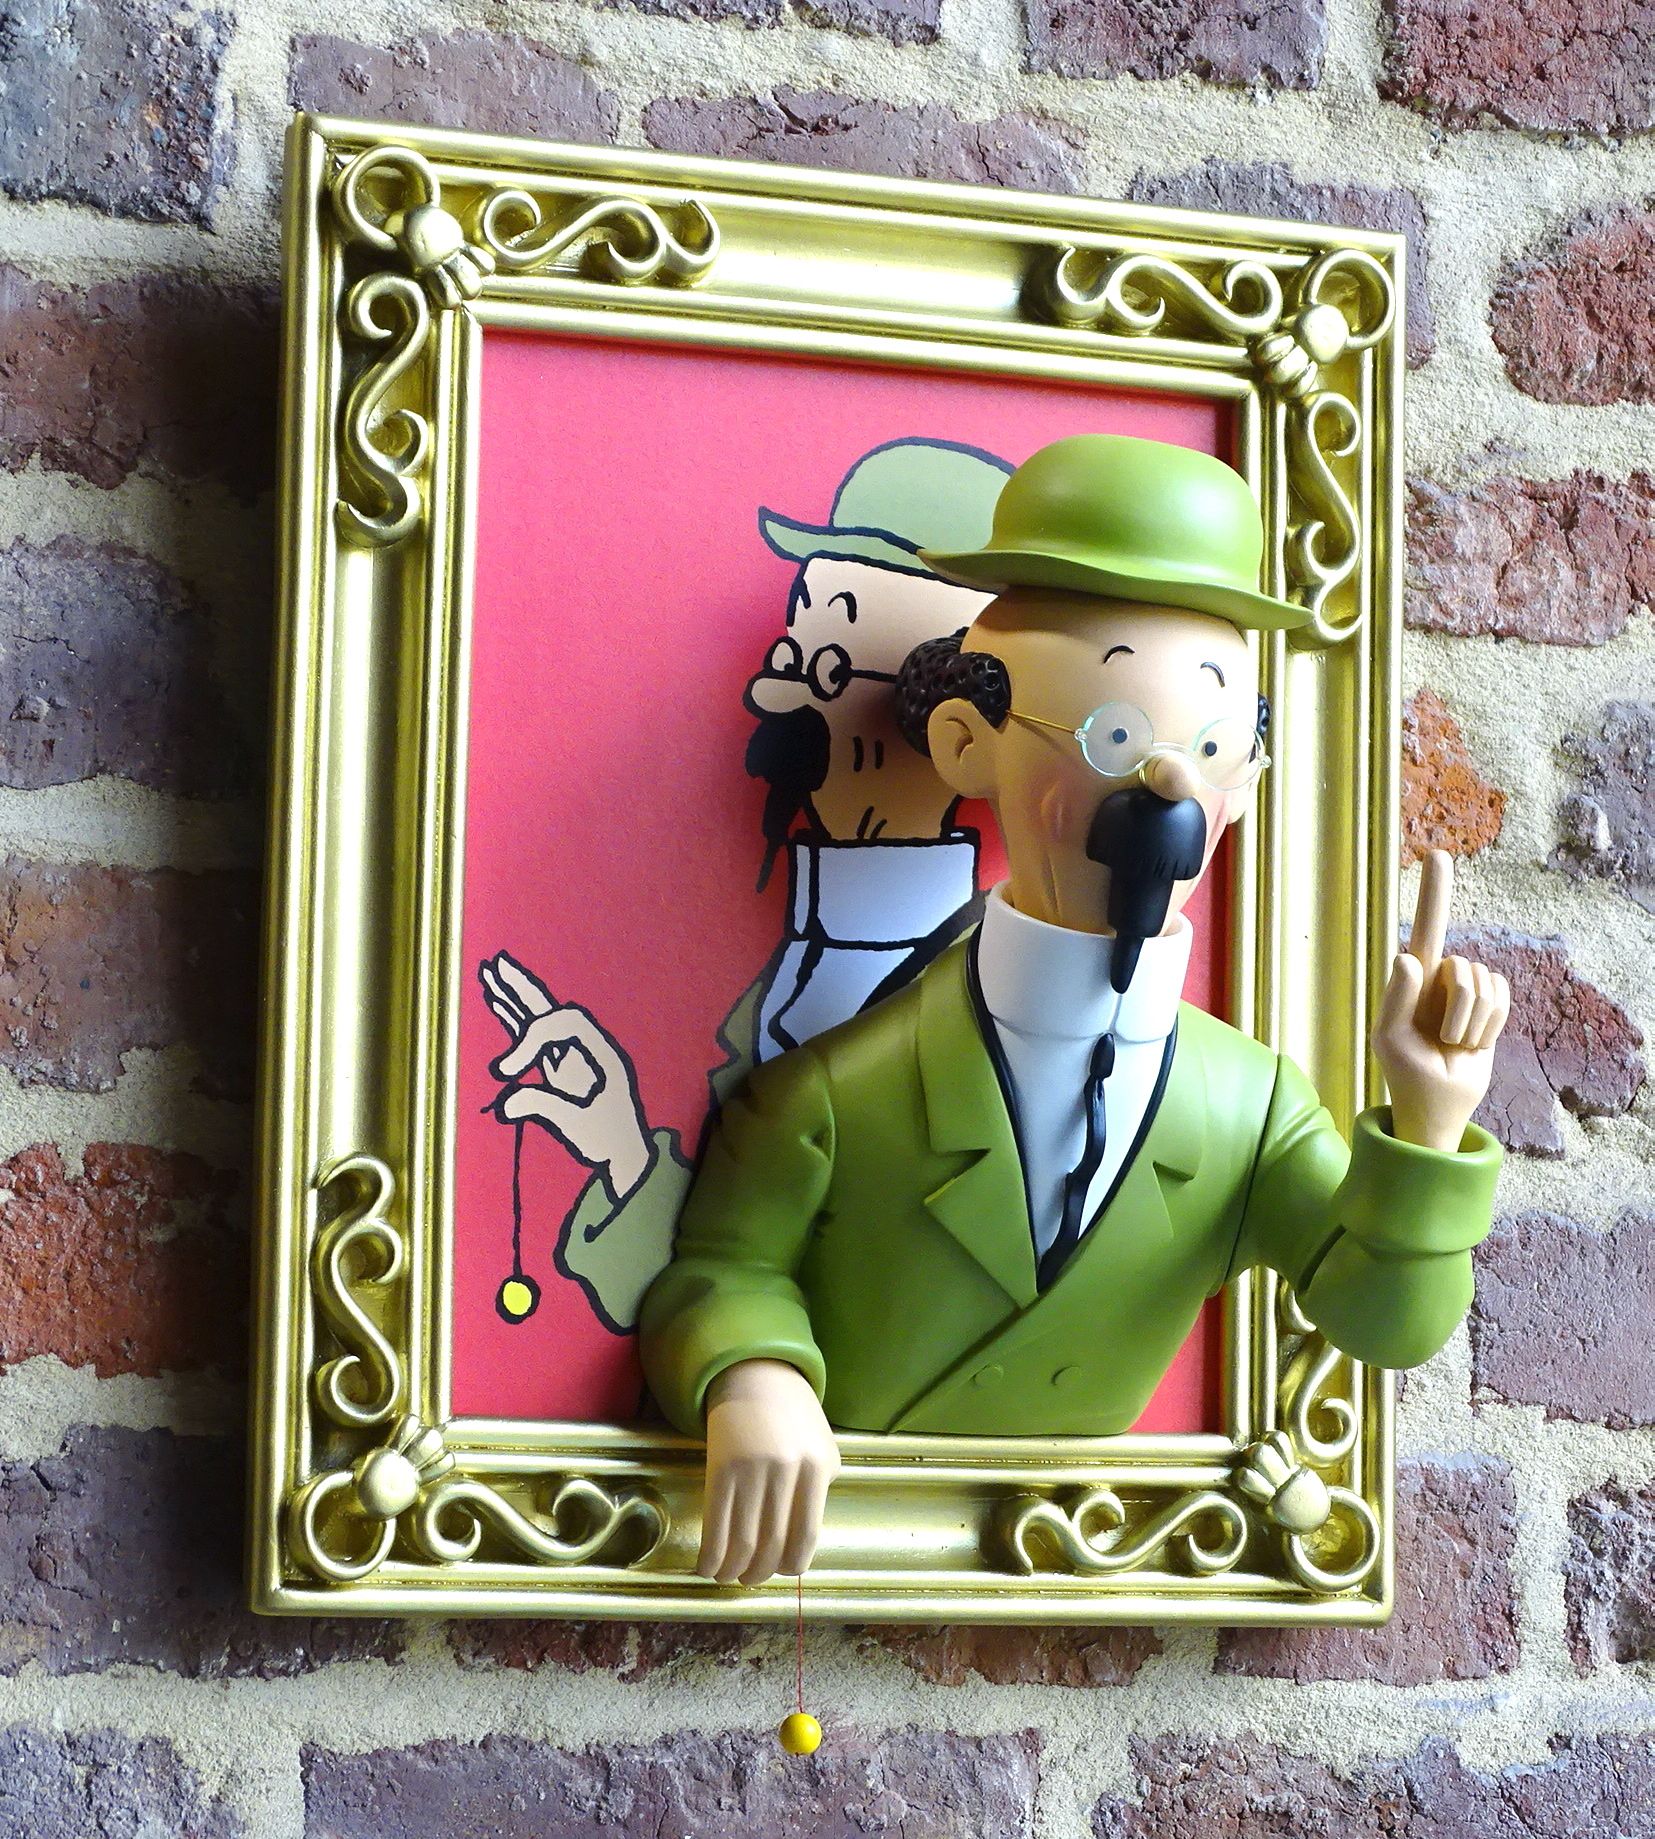 Tintin & Hergé 
3D frame of Professor Sunflower on the move (limited edition). F&hellip;